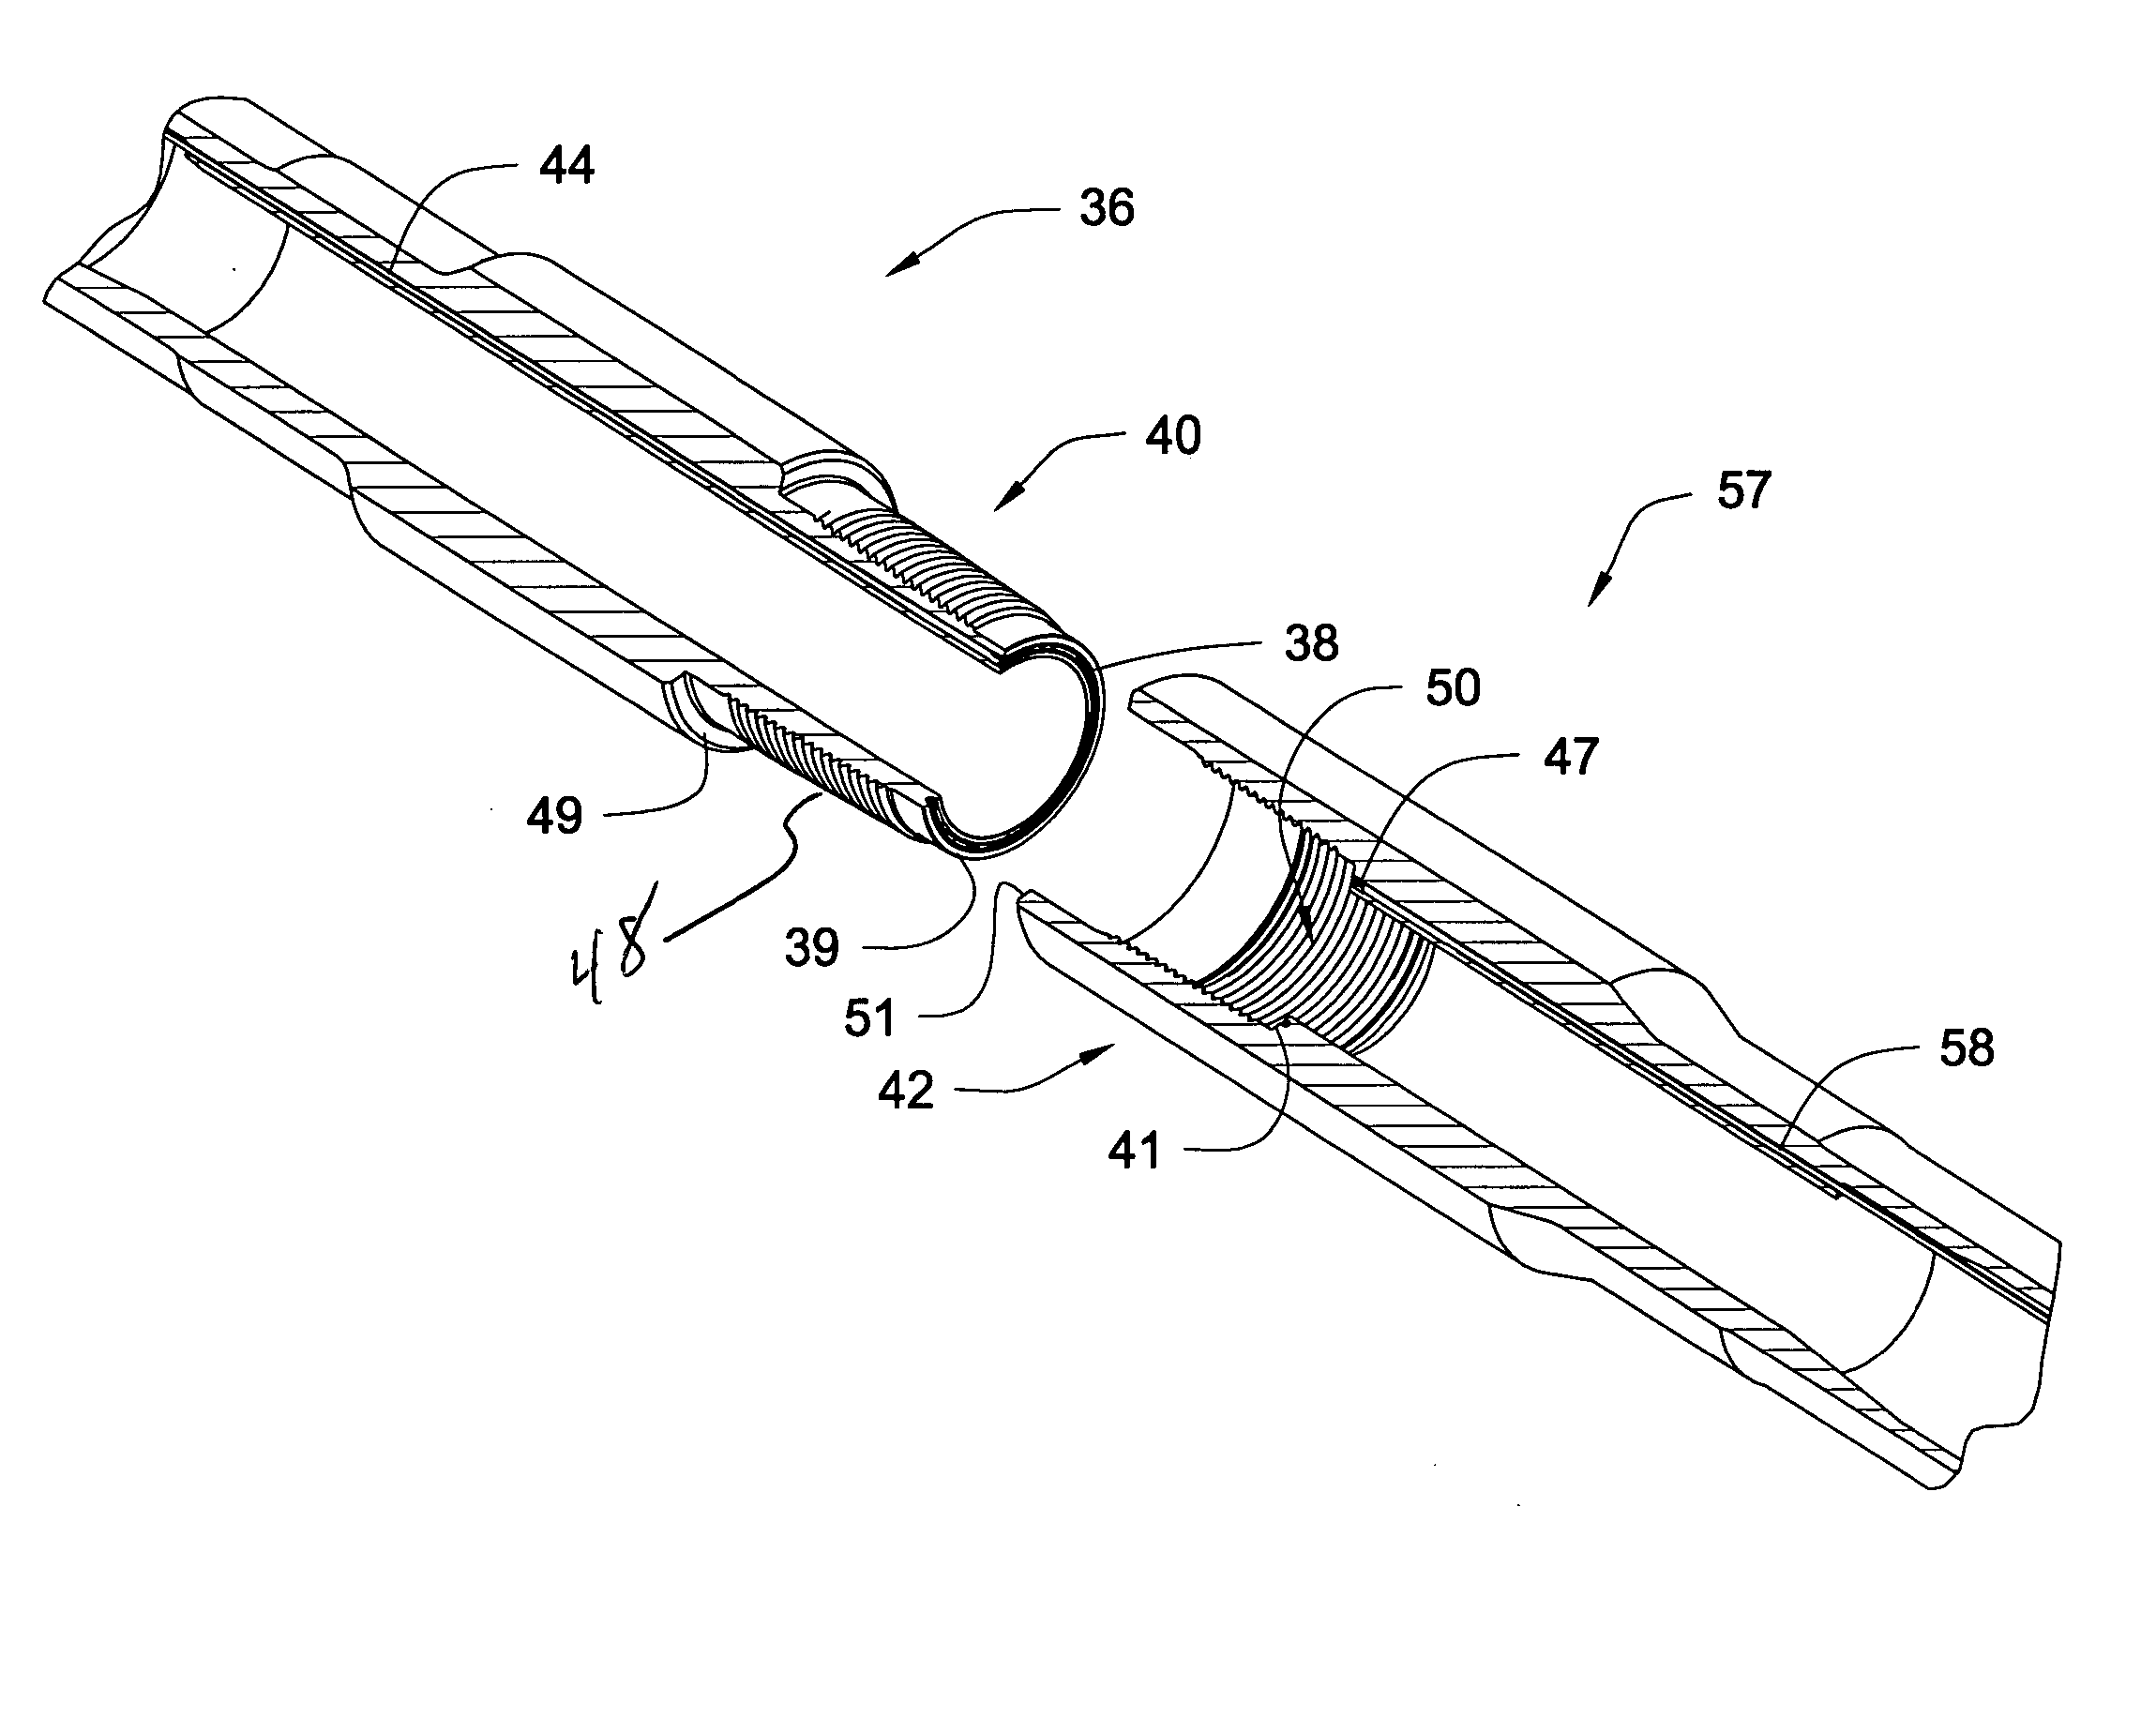 Downhole transmission system comprising a coaxial capacitor